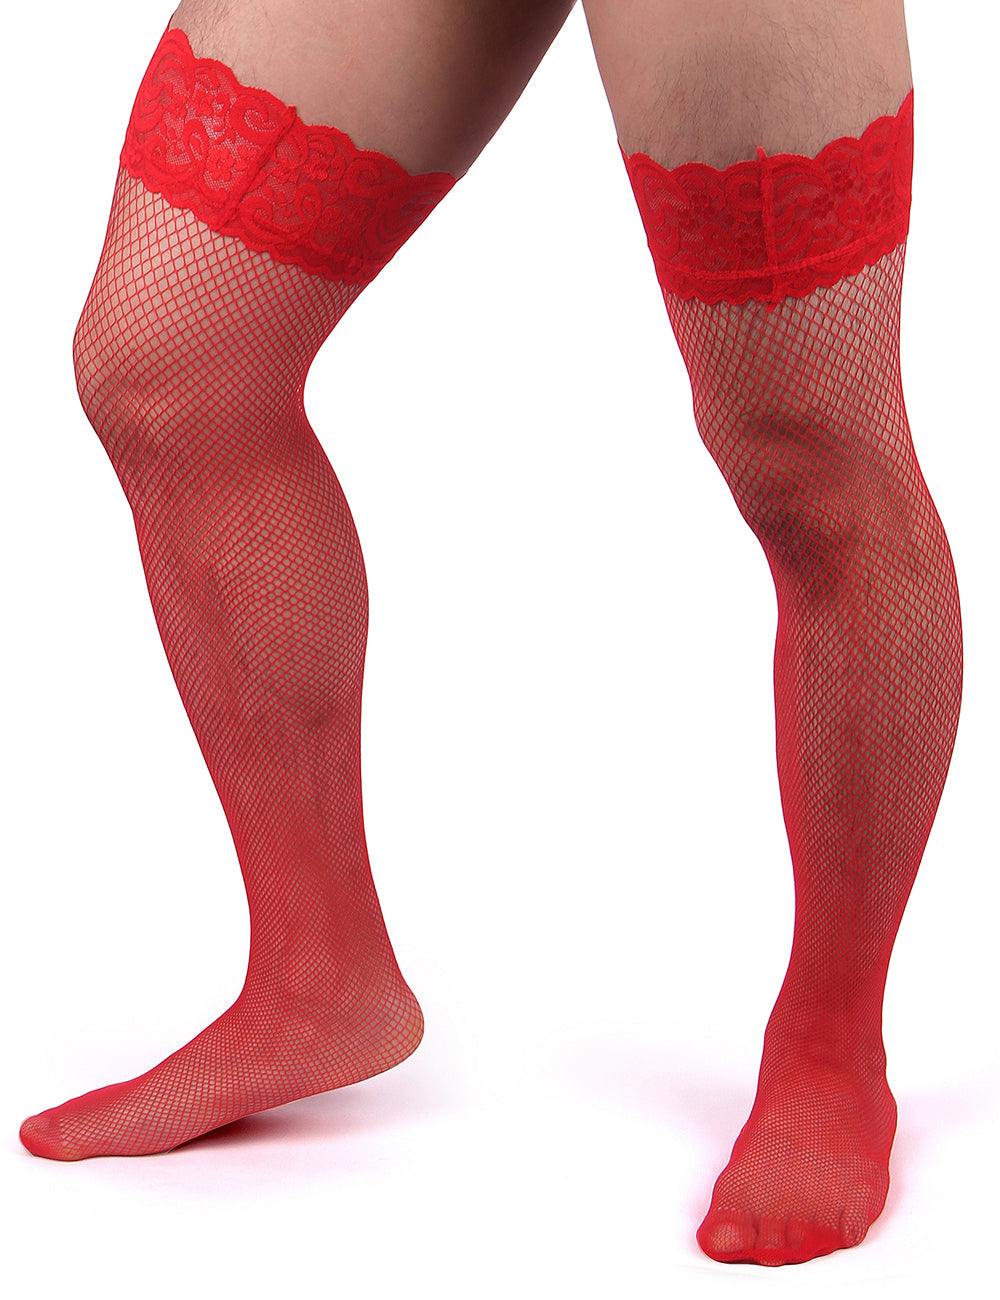 JCSTK - Unisex Fishnet Lace Top Stockings, Strong for Our Males to Wear! Red